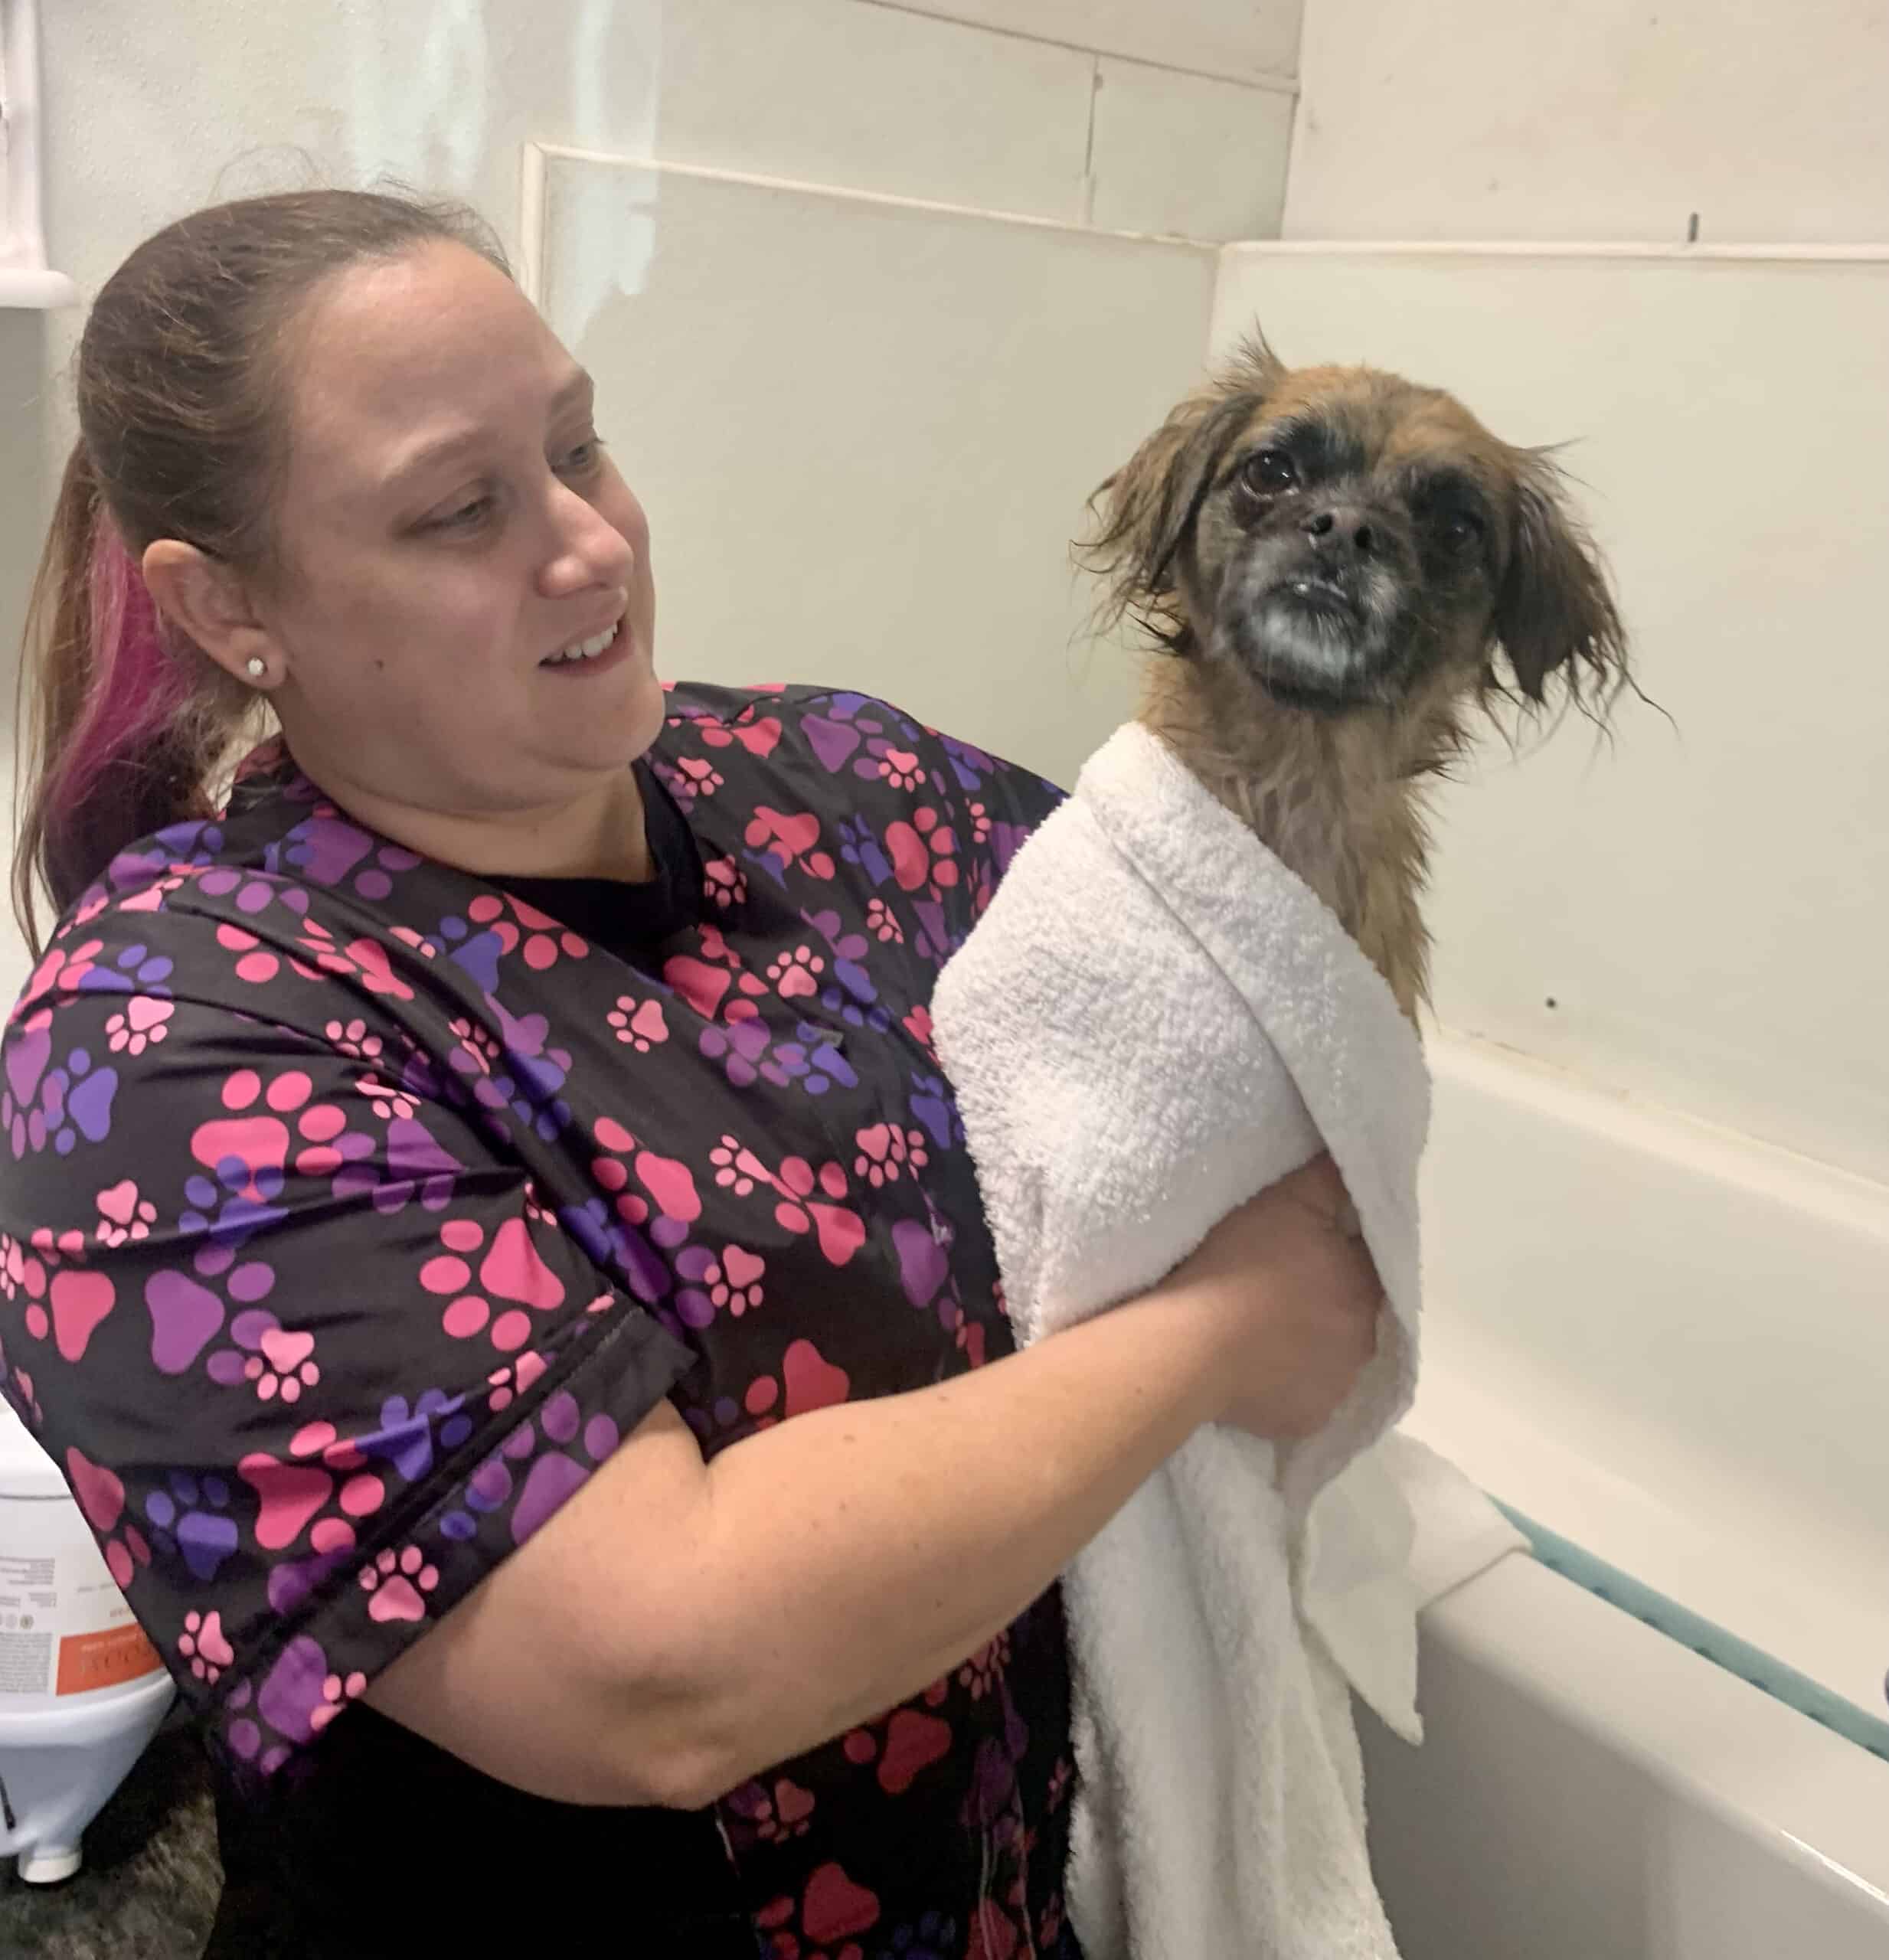 Professional dog washer holding cute little pet in a towel after his bath